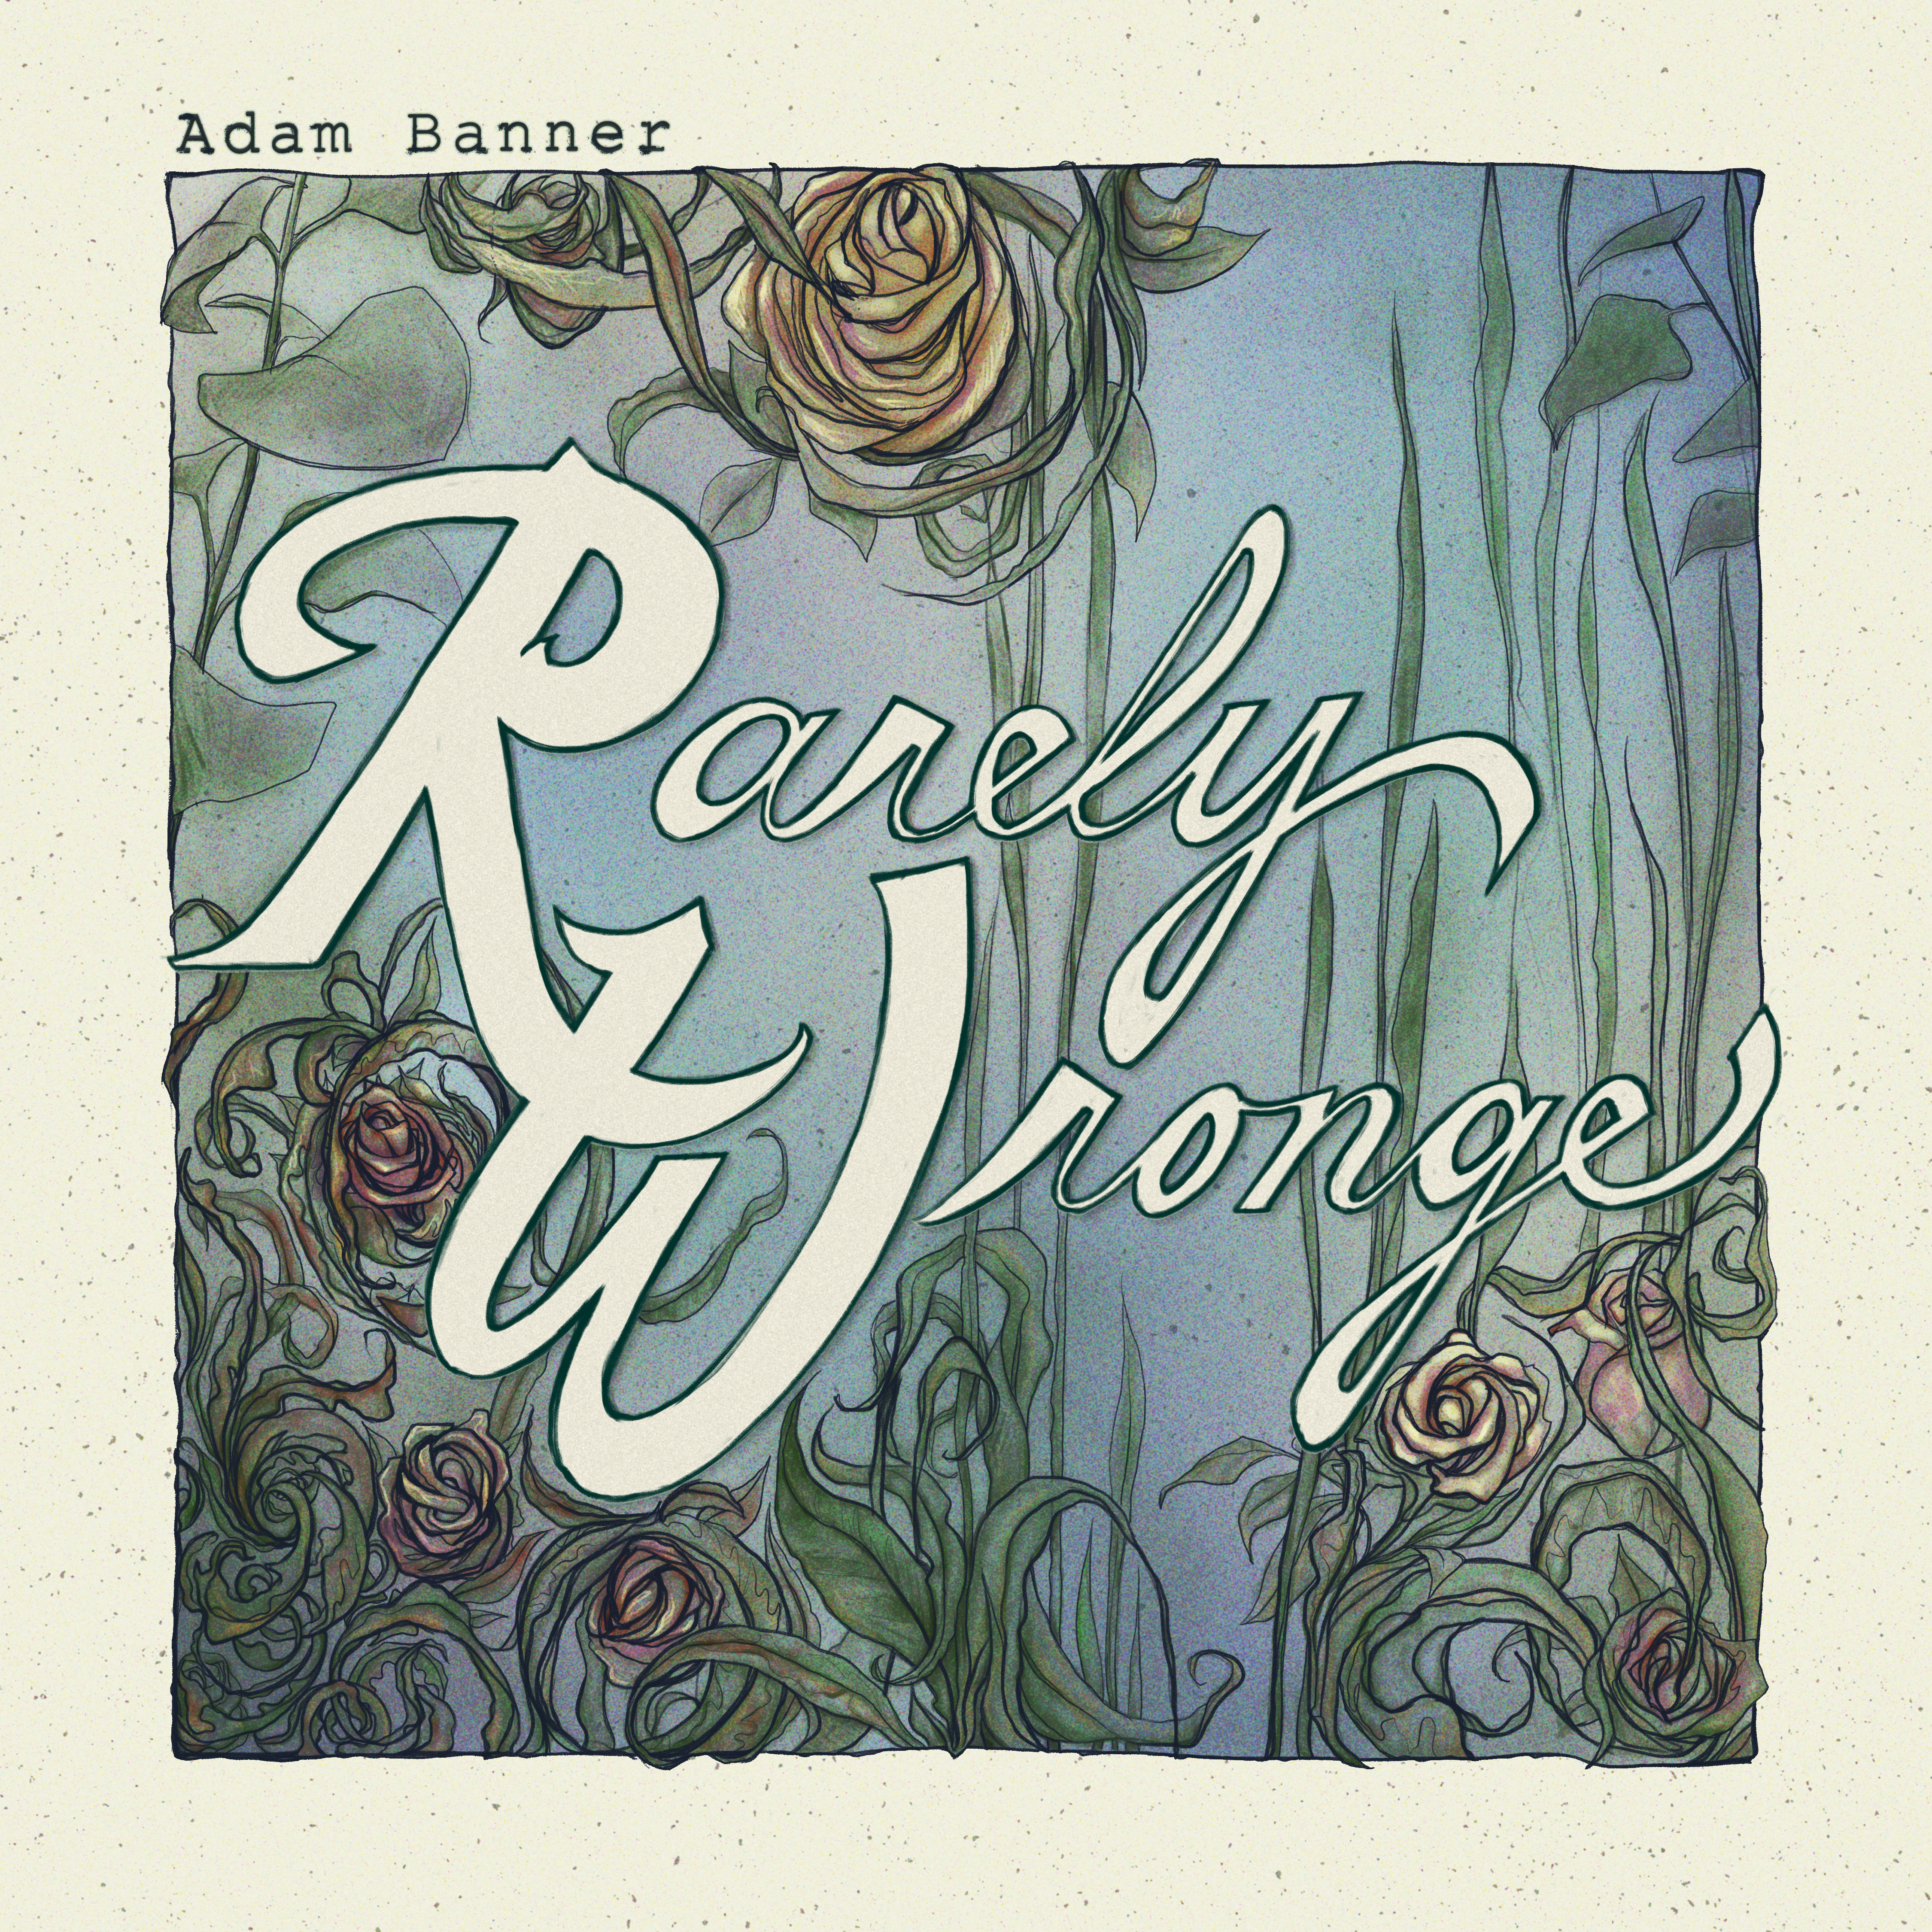 Click image to buy "Rarely Wronge" on iTunes